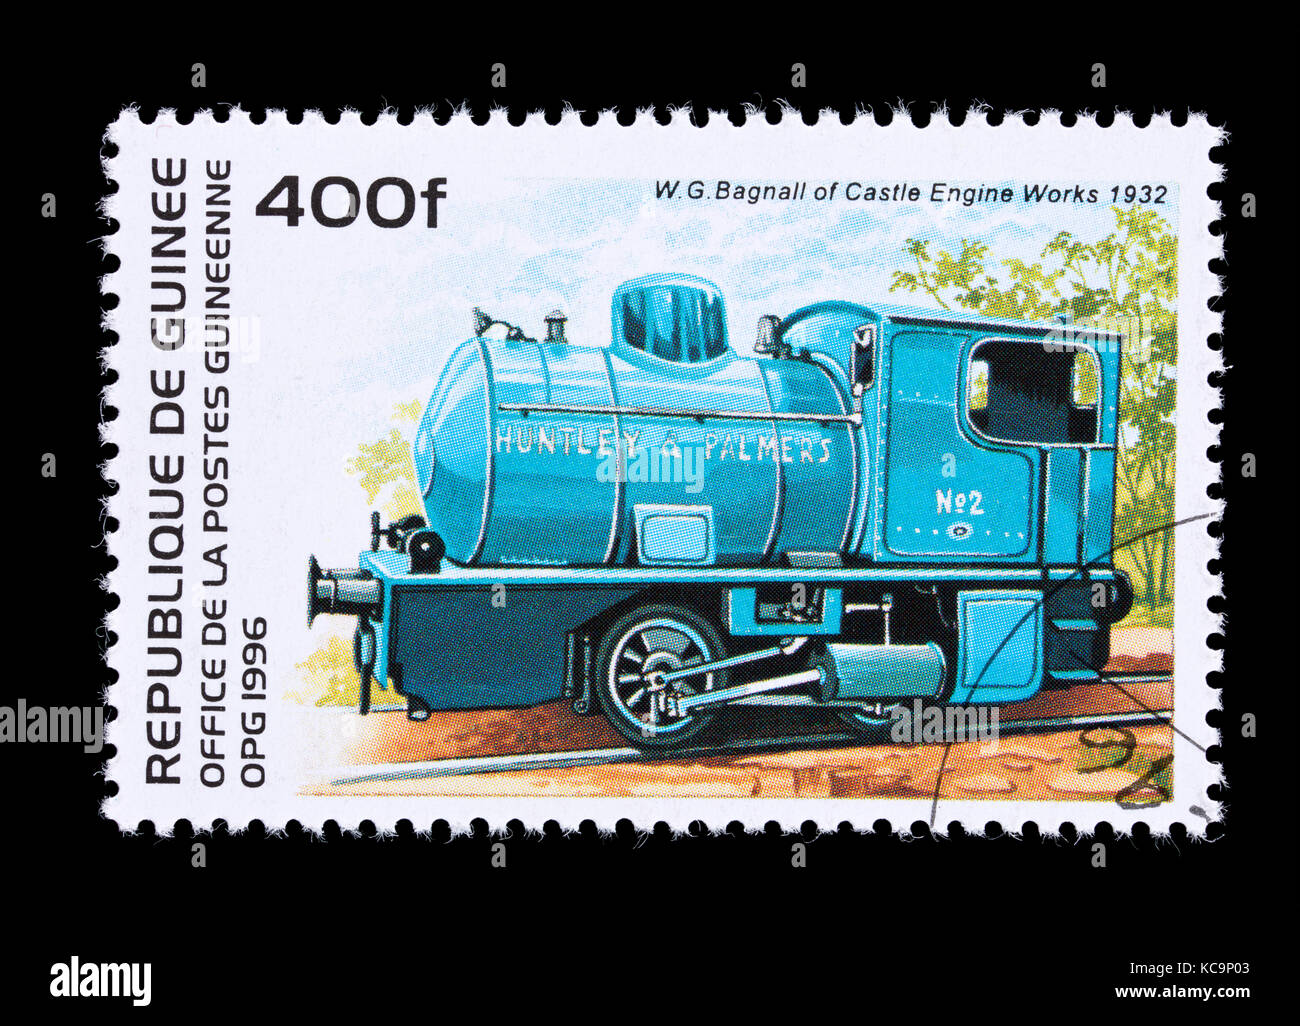 Postage stamp from Guinea depicting W. G. Bagnall steam locomotive of the Castle Engine Works, 1932. Stock Photo